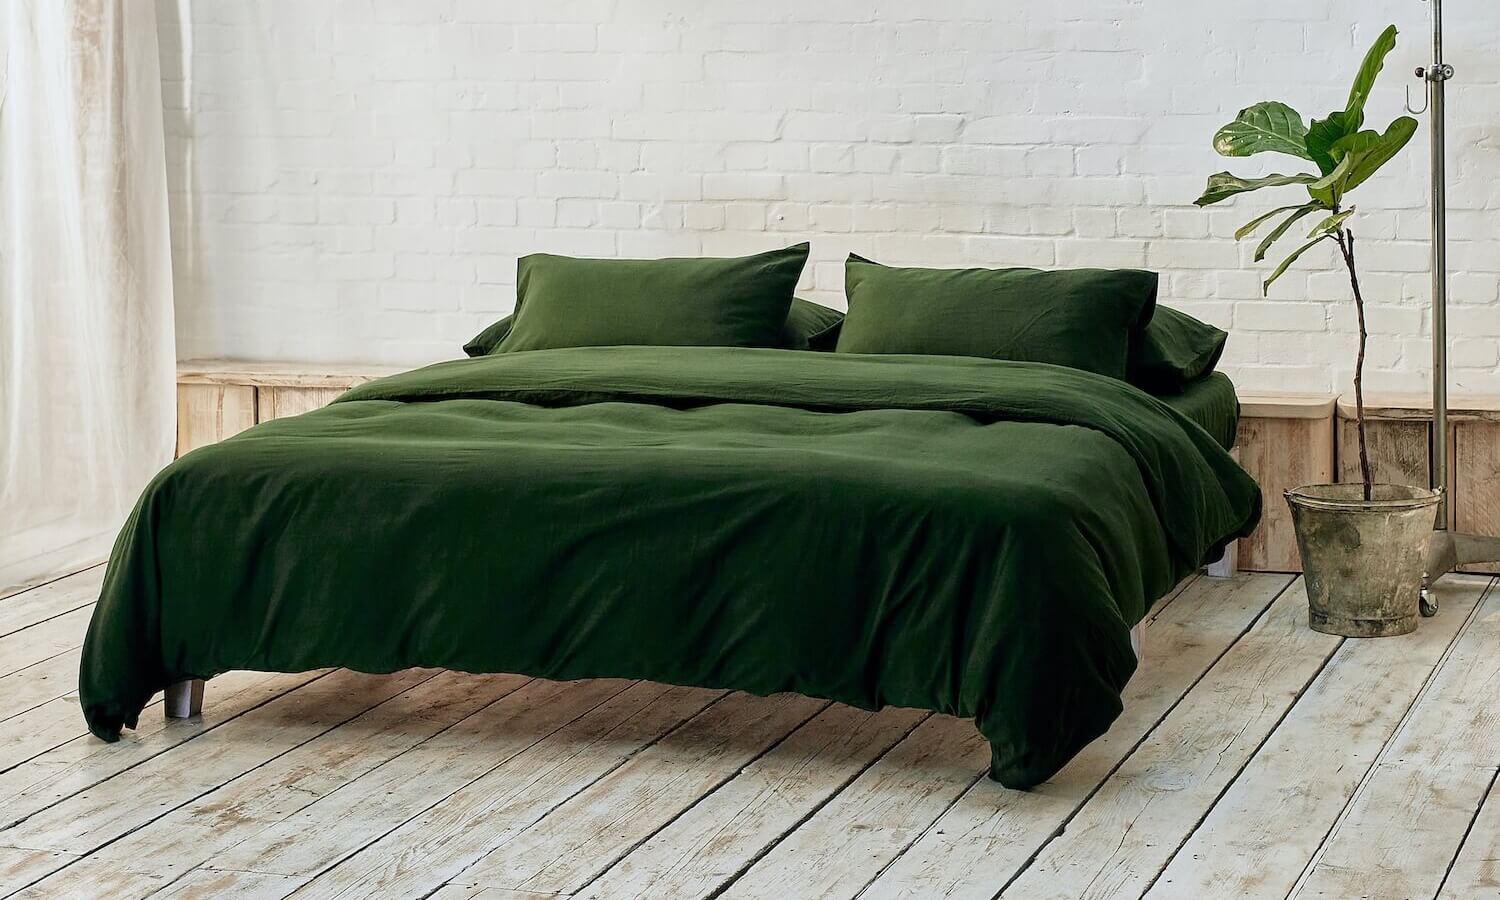 dark green duvet cover, two pillowcases, and bottom sheet on double bed in apartment with plant and wooden flooring